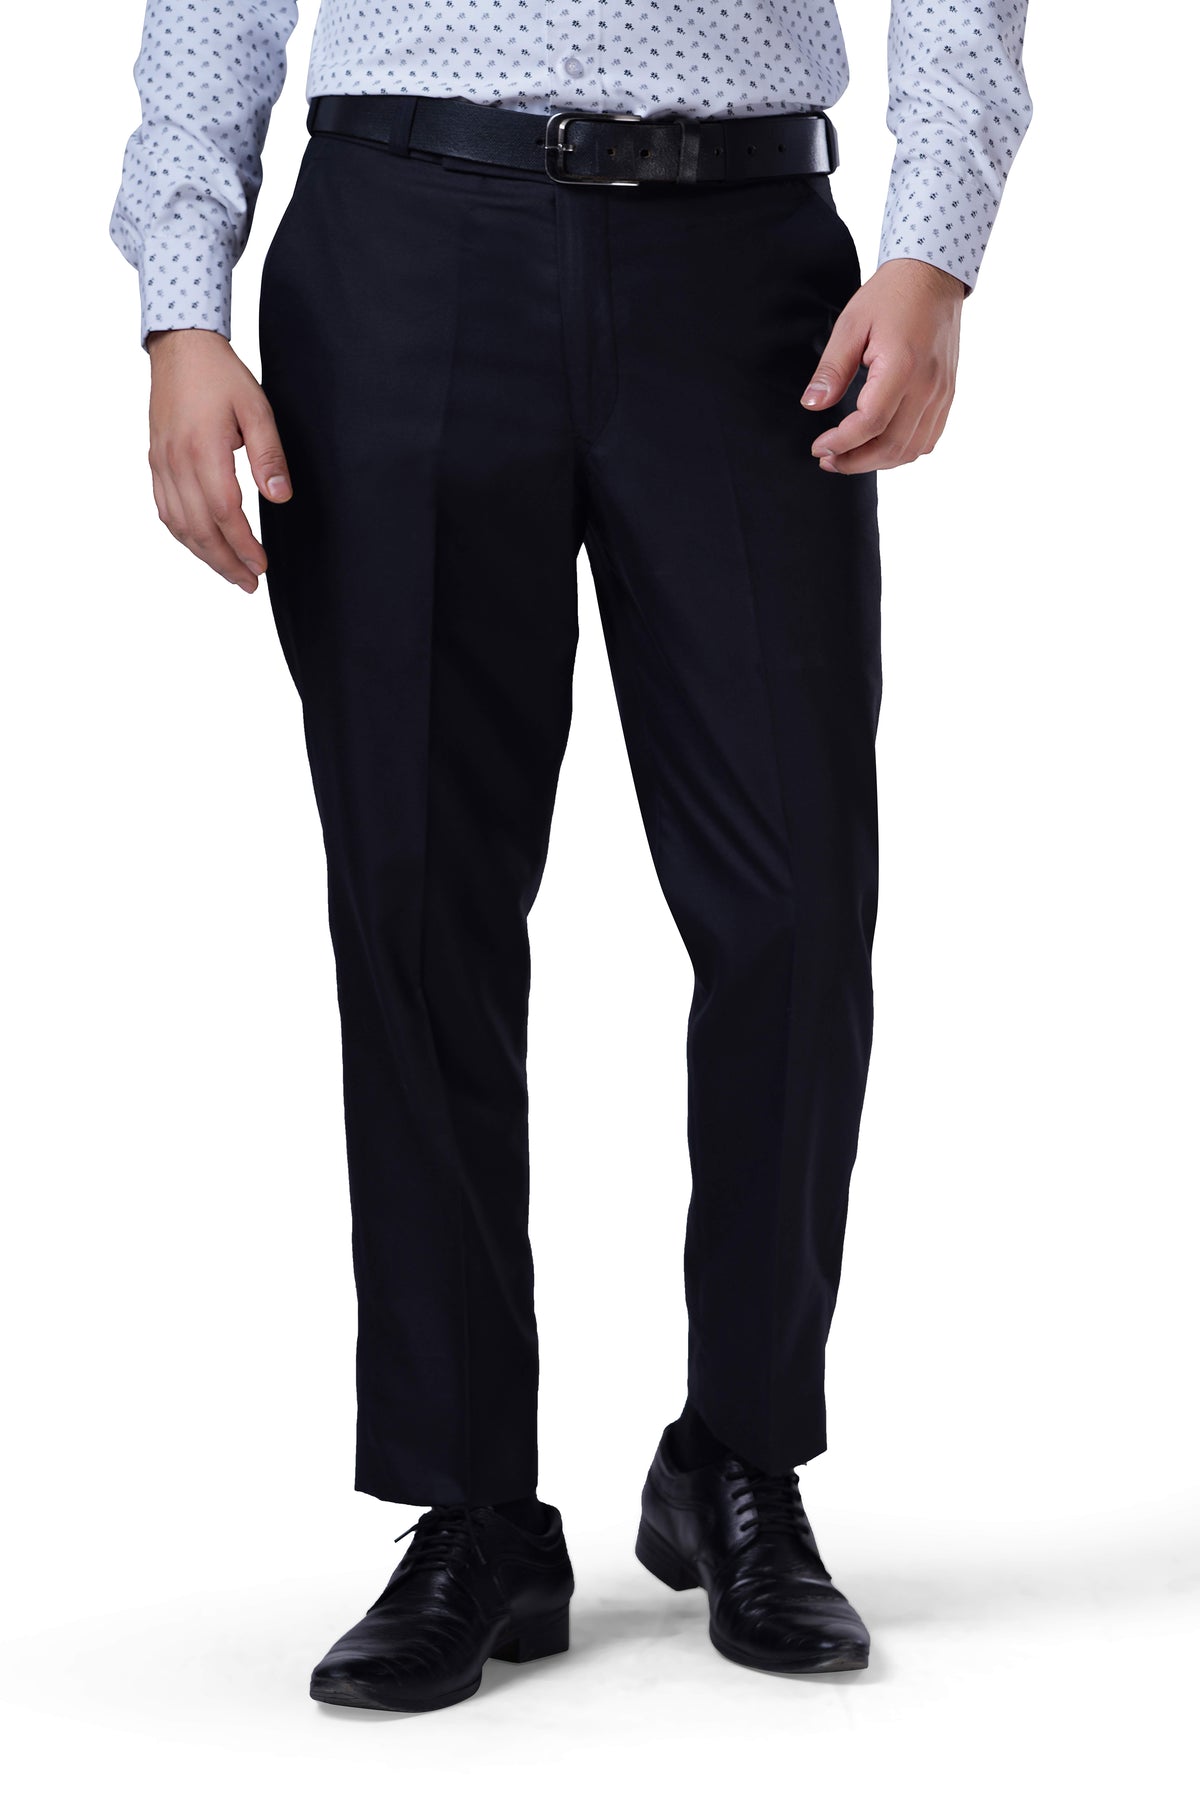 Buy TRAIFO Slim Fit Beige Formal Trouser for Men - Polyester Viscose Bottom  Formal Pants for Gents - Work Utility Formal Pants for Men - 38 at Amazon.in